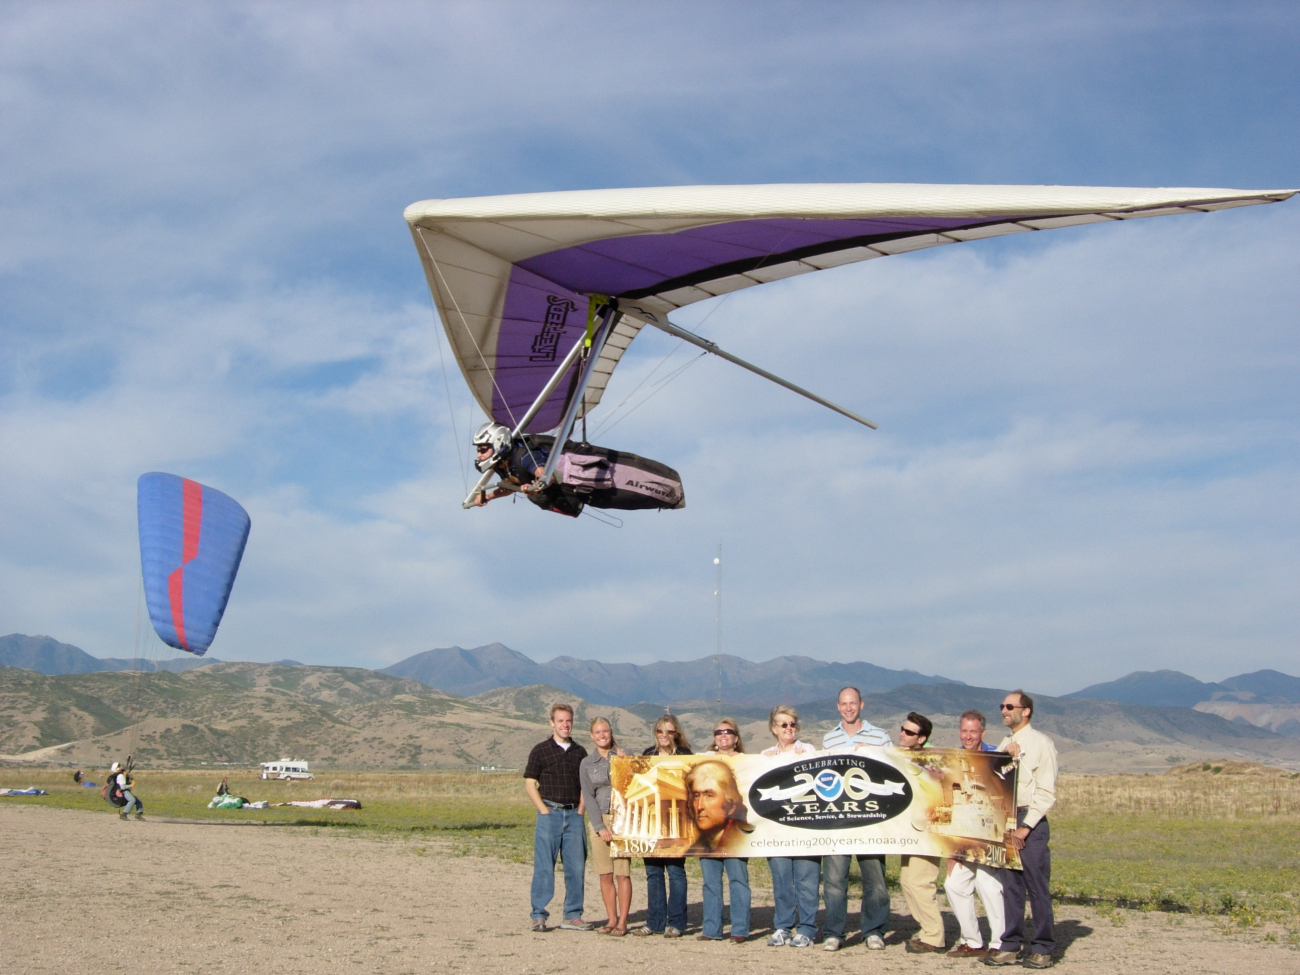 Hundreds of Utah glider pilots rely daily on NOAA's National Weather ServiceSalt Lake City aviation services, including soaring forecasts and observedsurface and upper air wind information